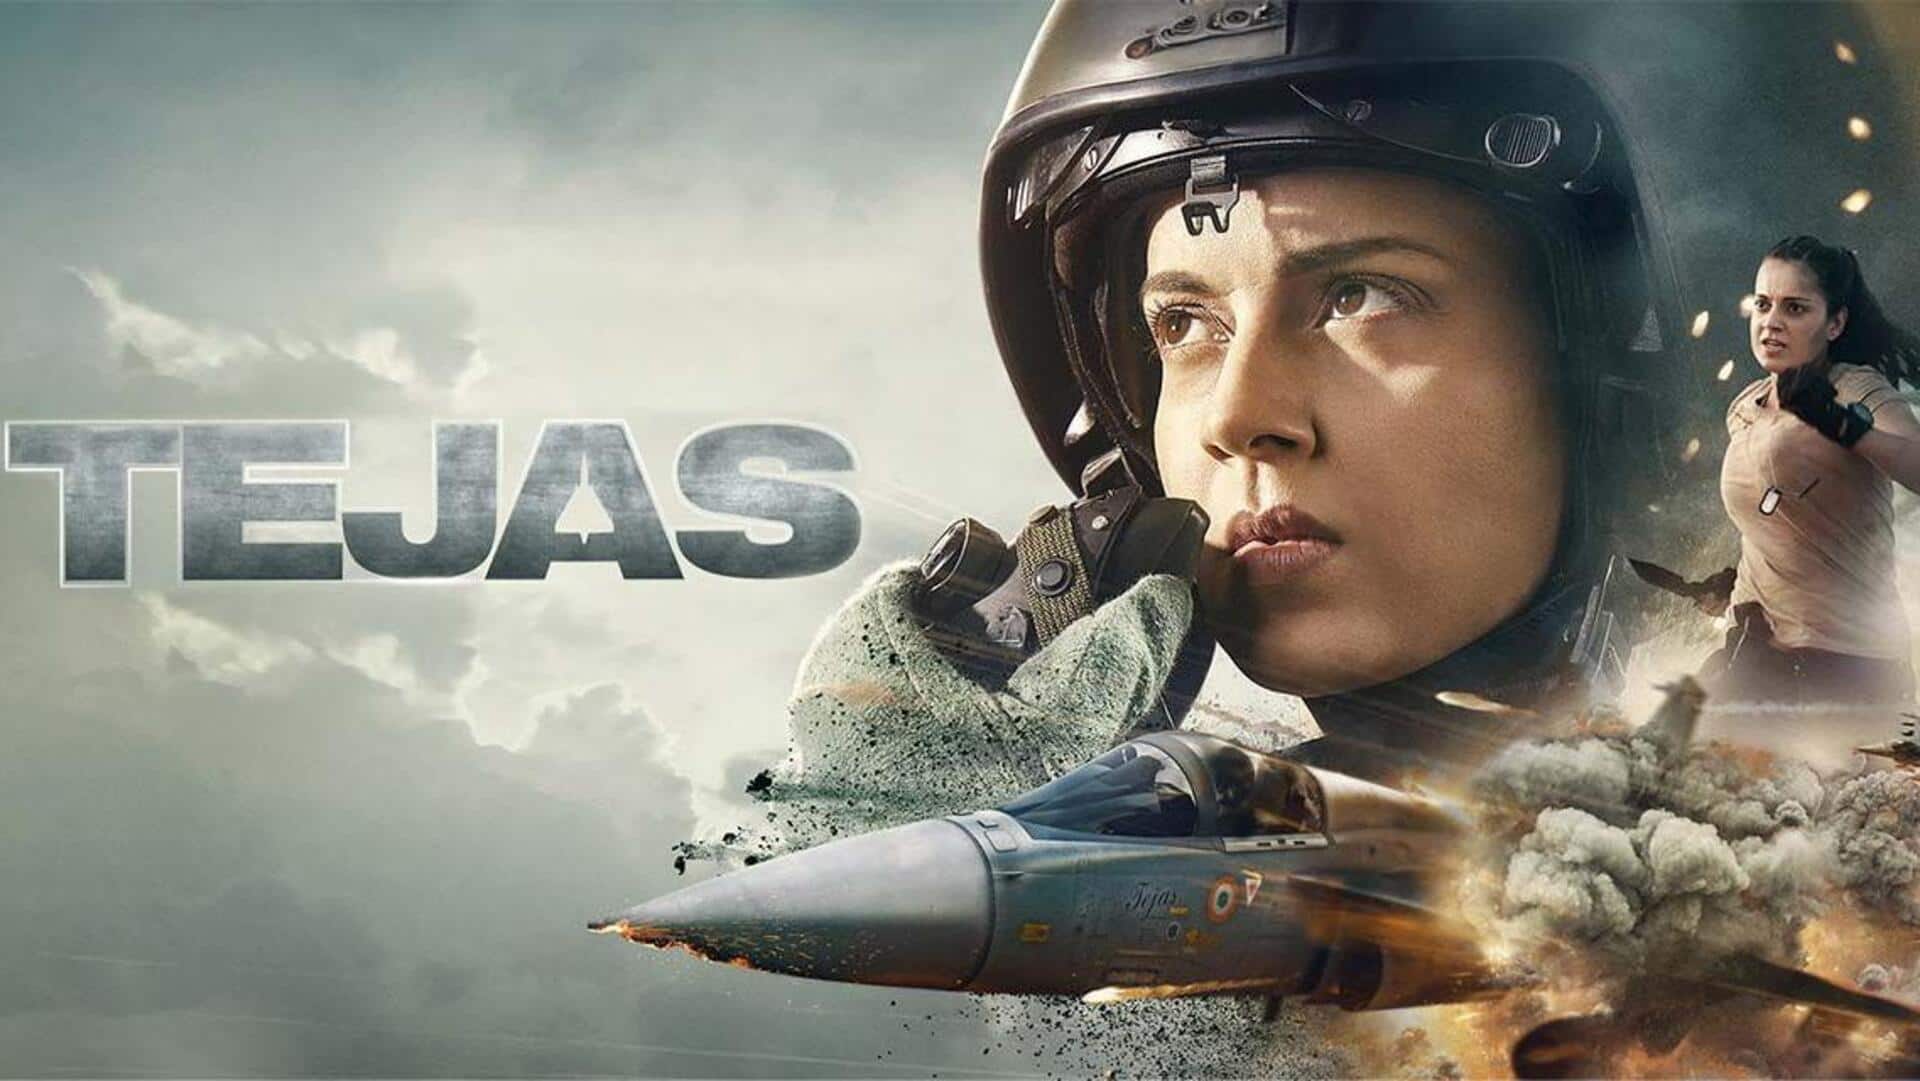 Box office collection: 'Tejas' crashes badly with no hope